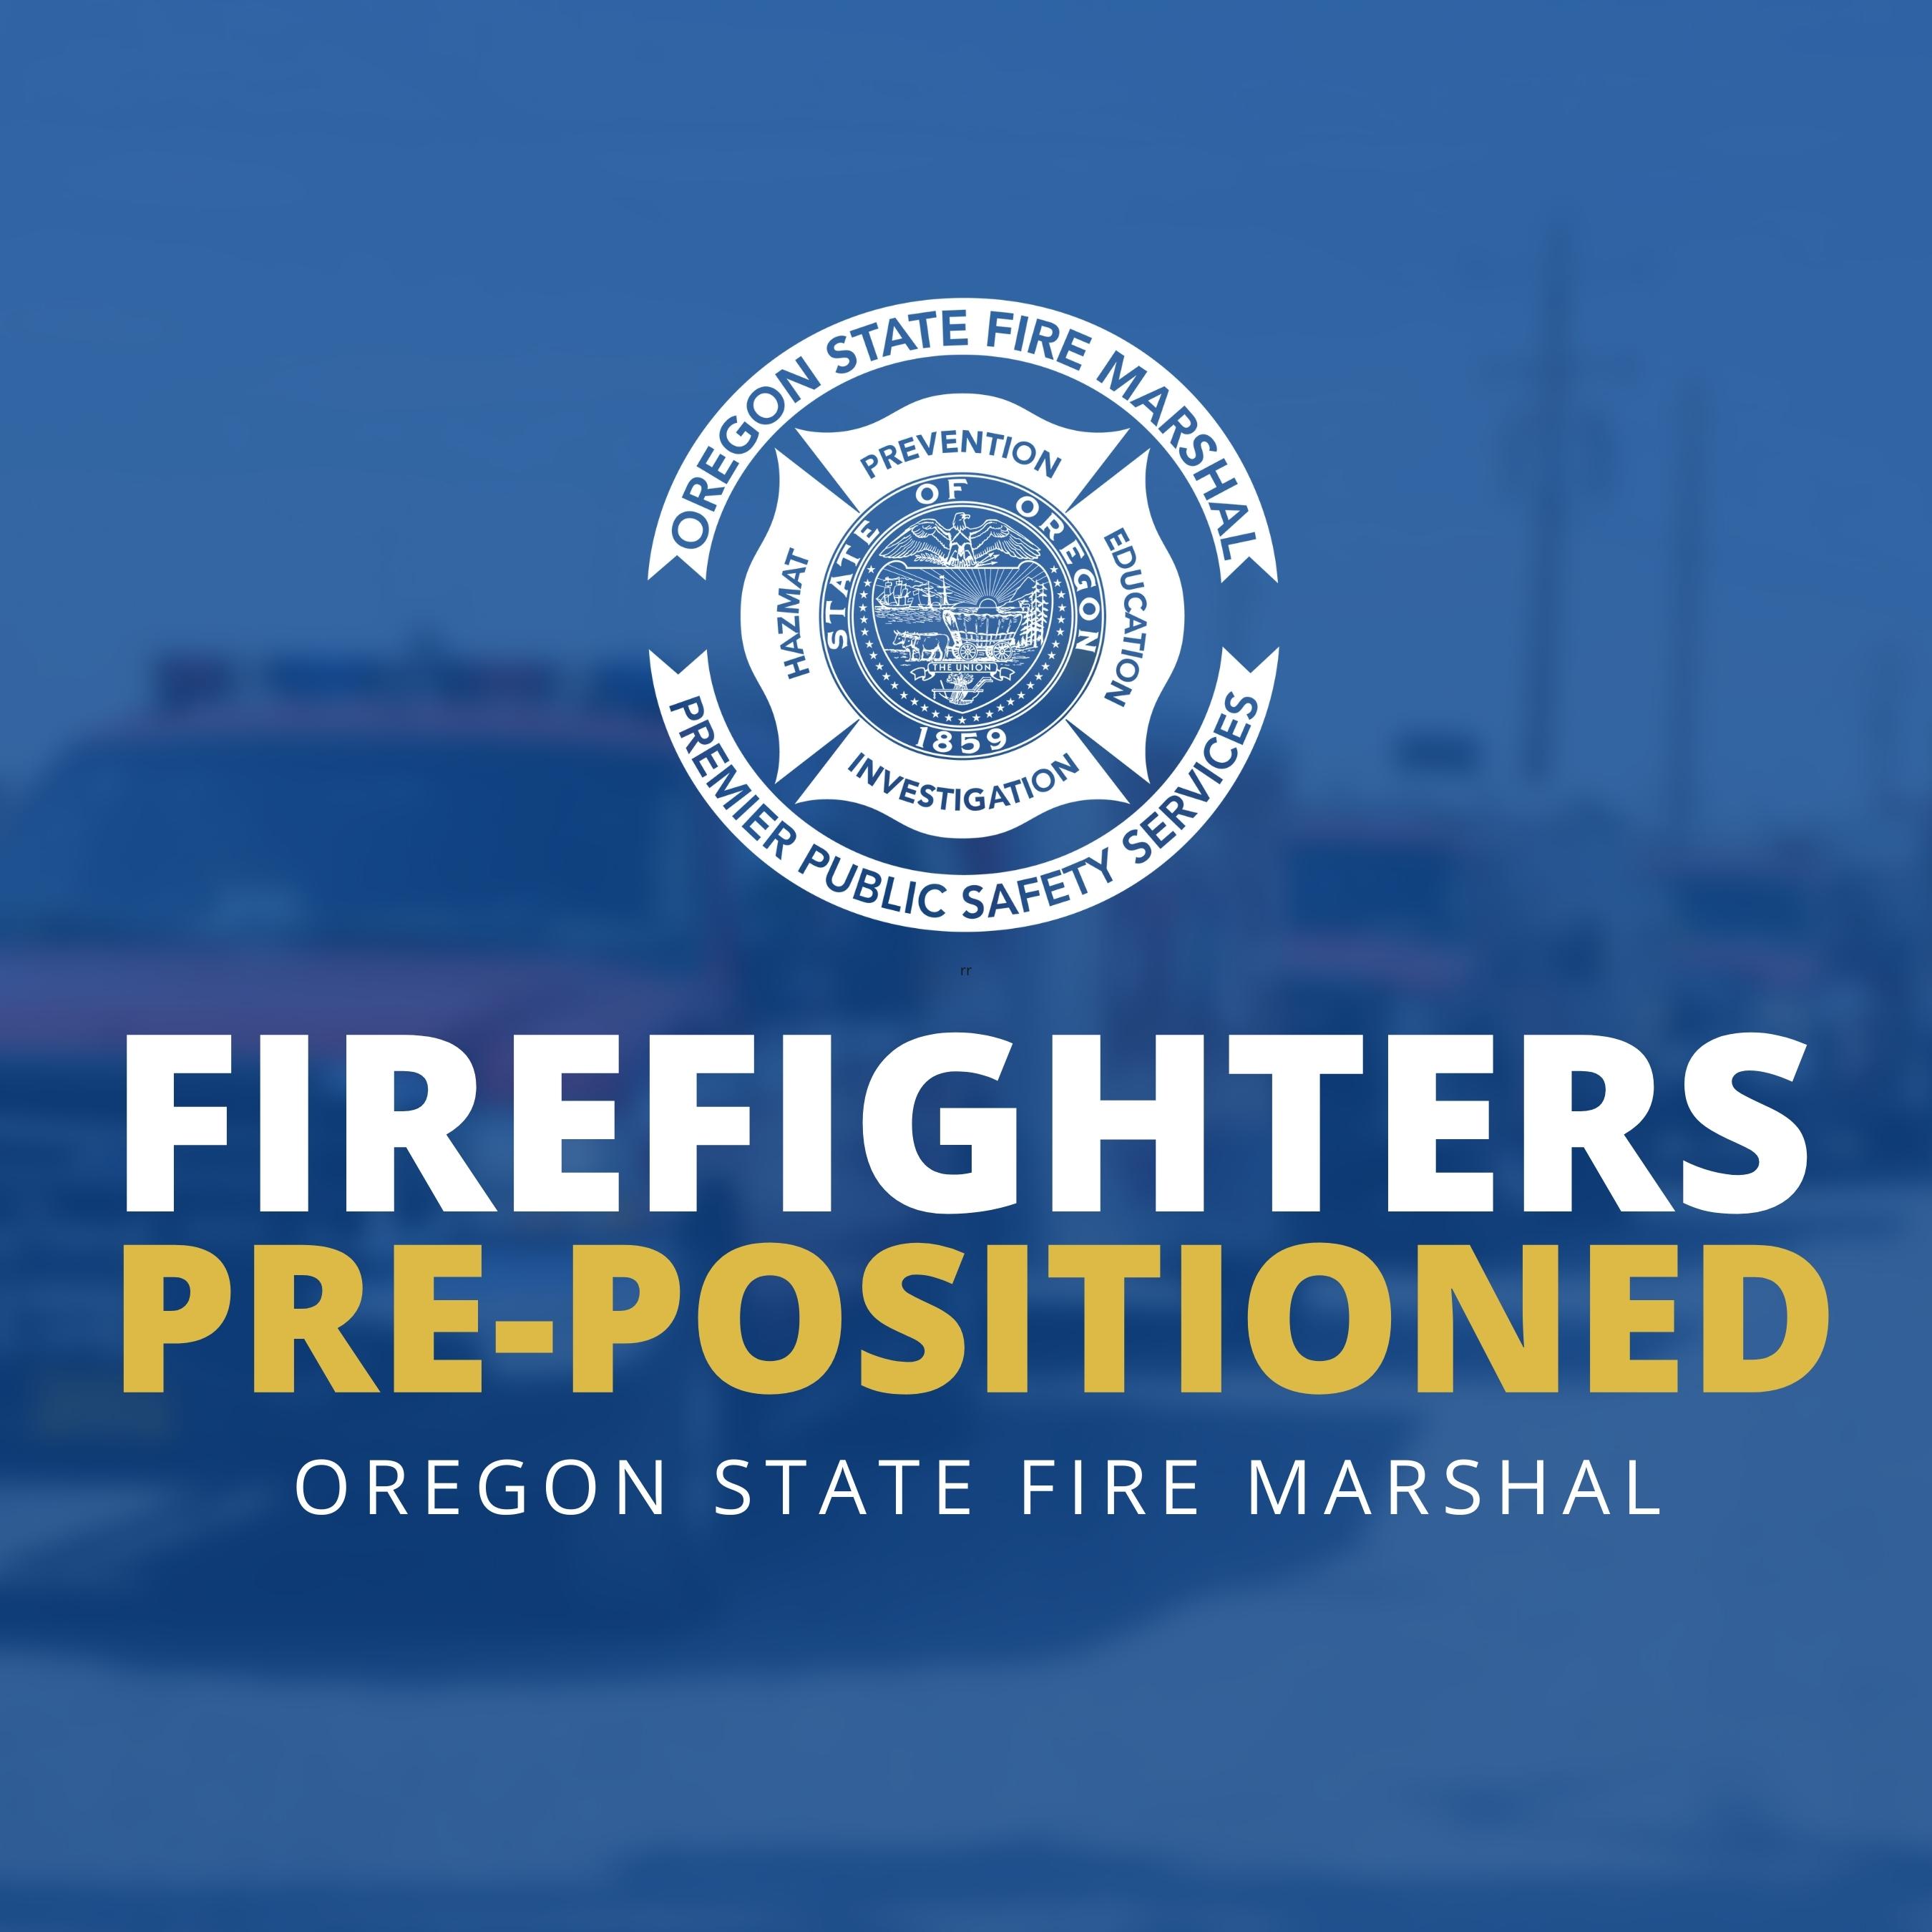 Words "firefighters pre-positioned" on a blue backgraound